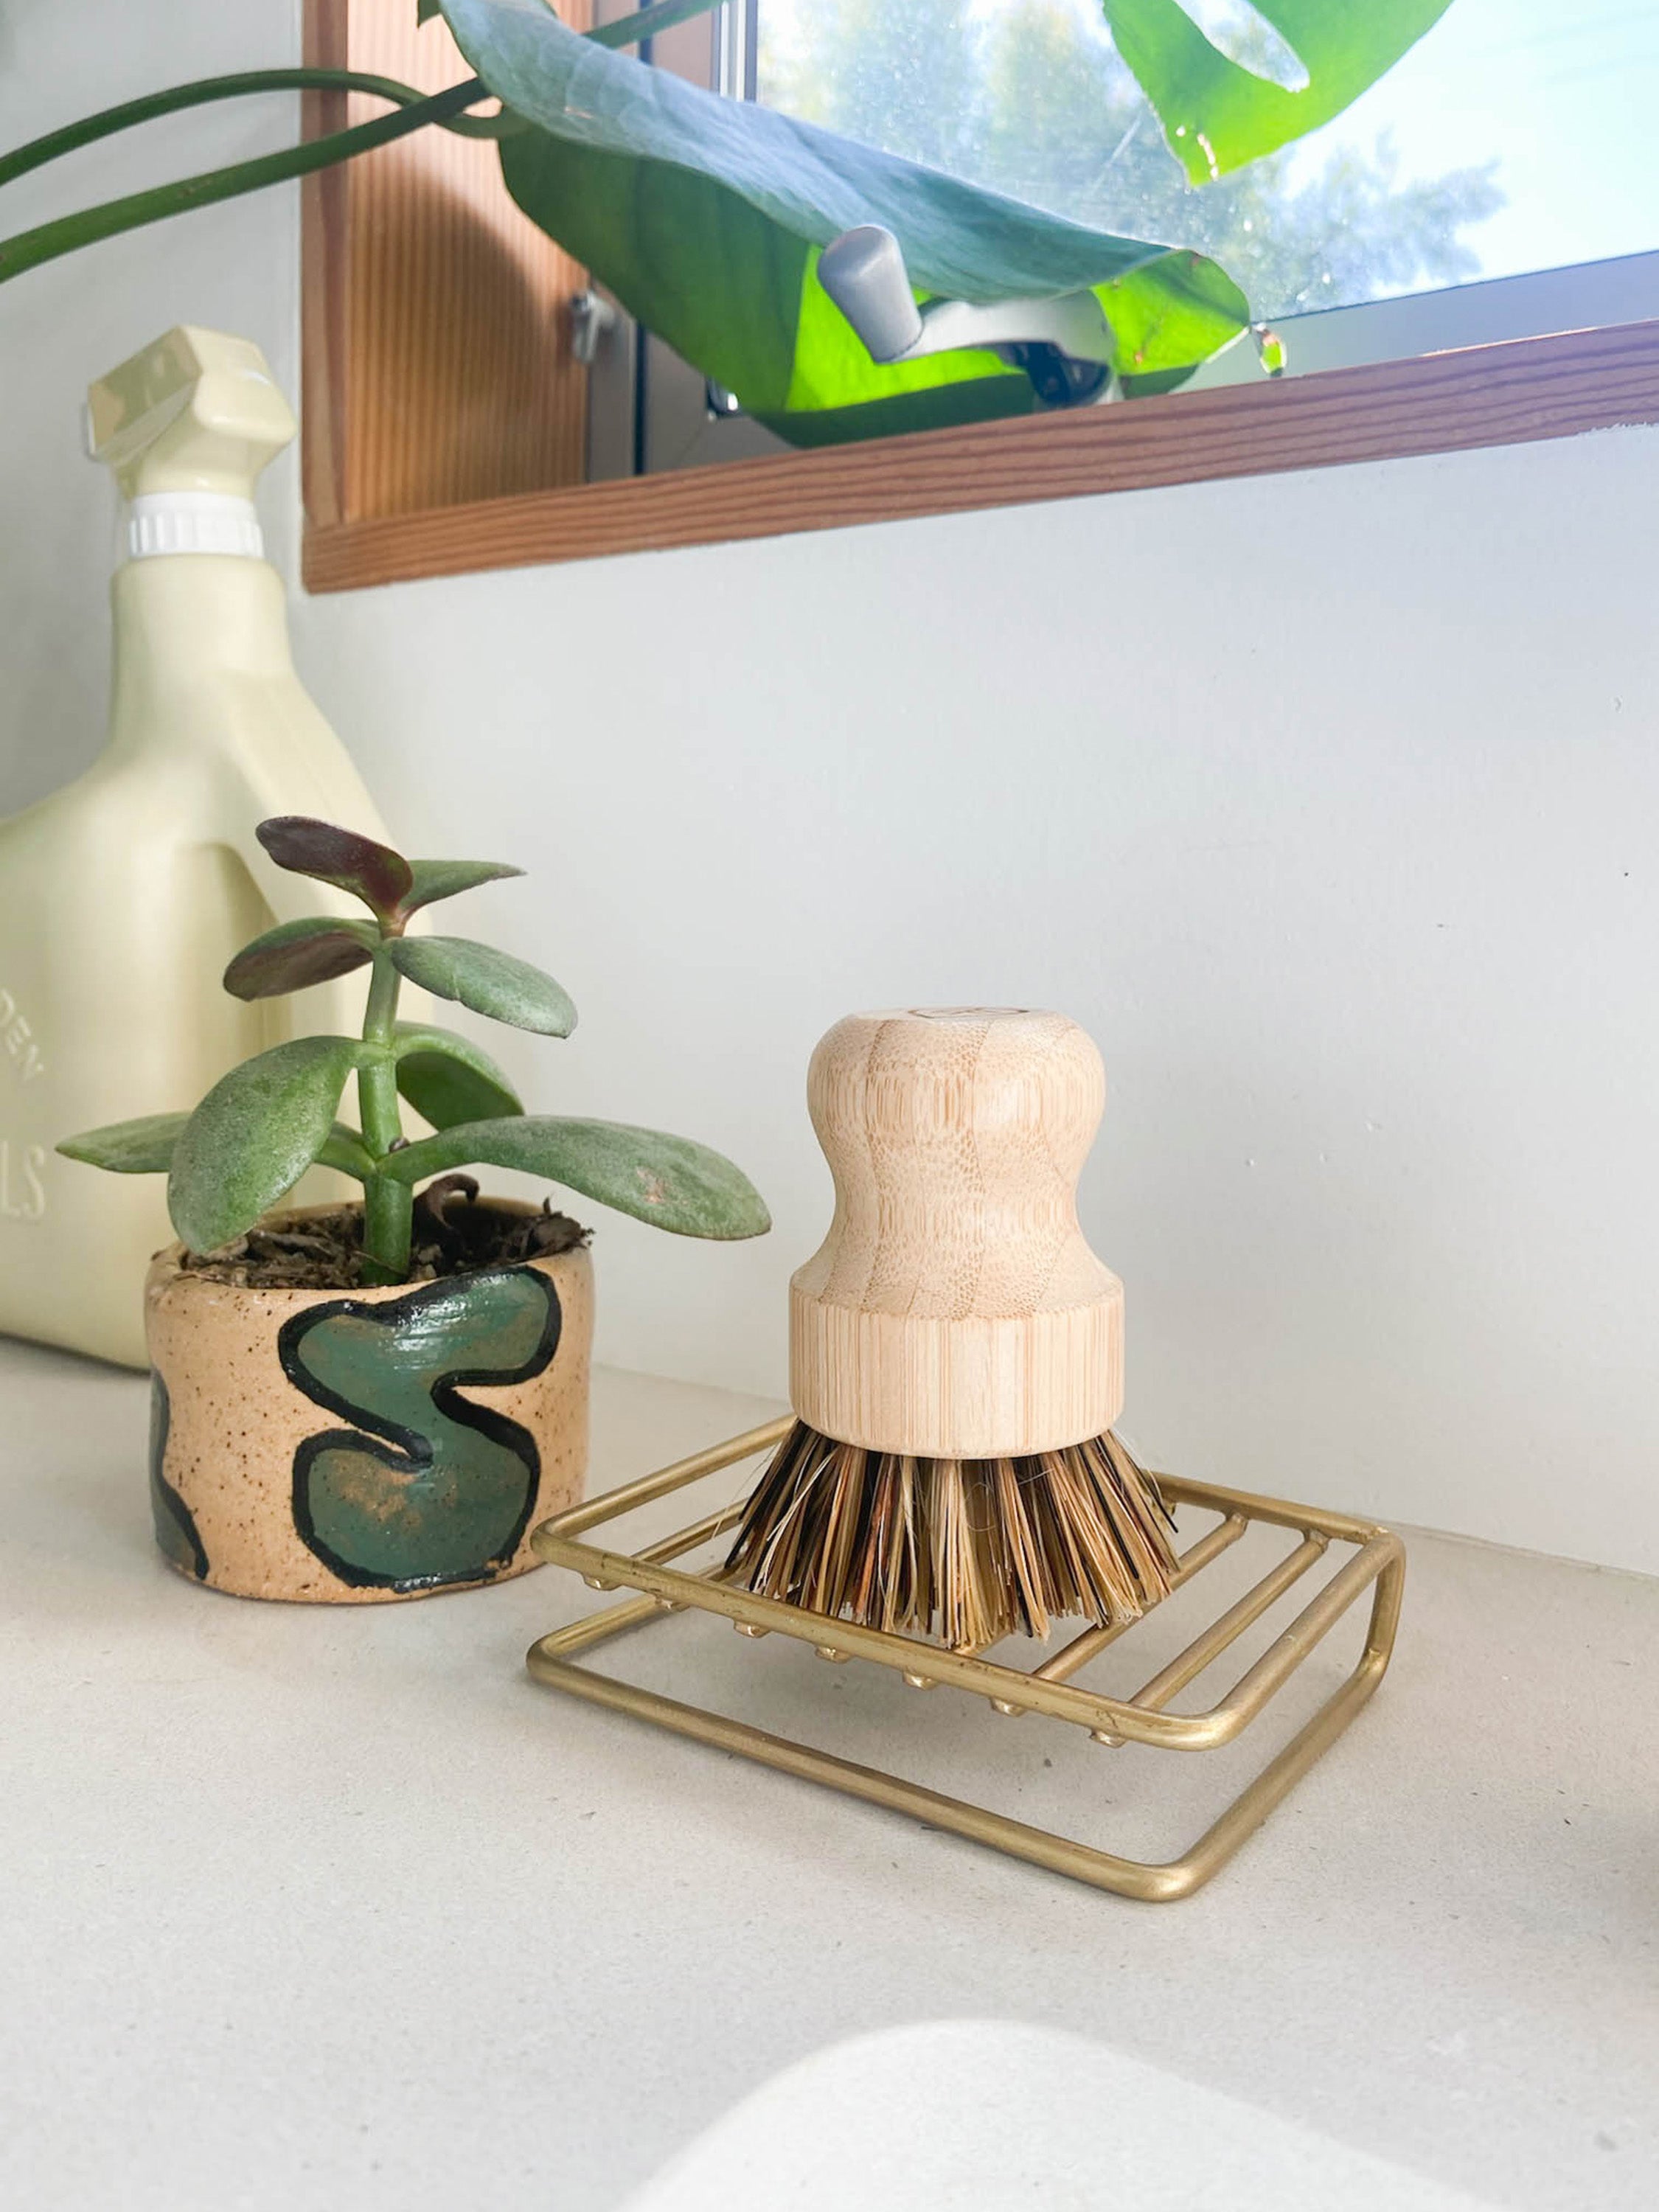 Brass Wire Soap Dish with Pot Scrubber resting on it on countertop with plants | lifestyle